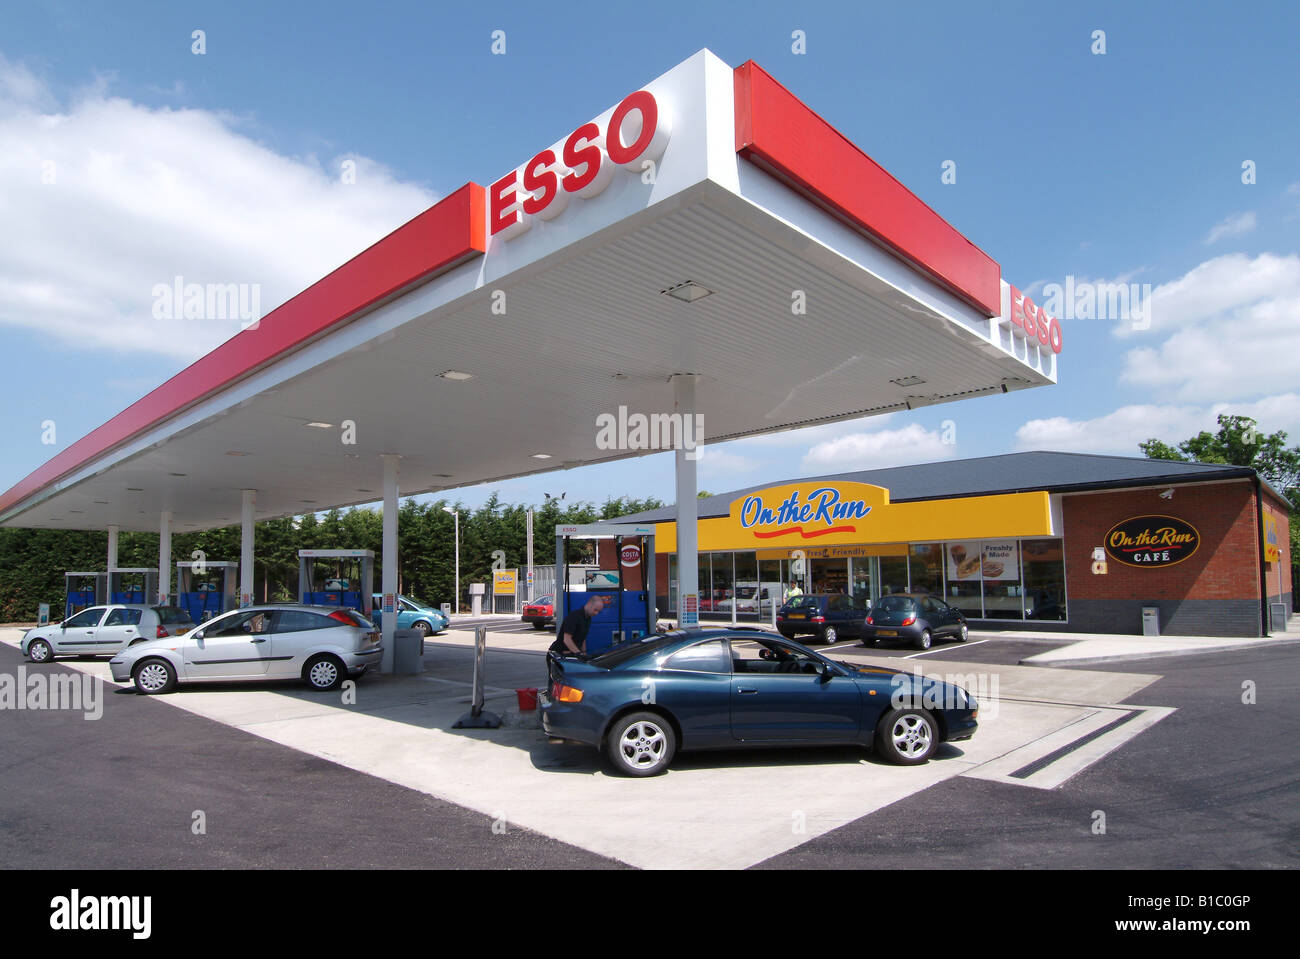 Petrol Station Forecourt High Resolution Stock Photography And Images Alamy